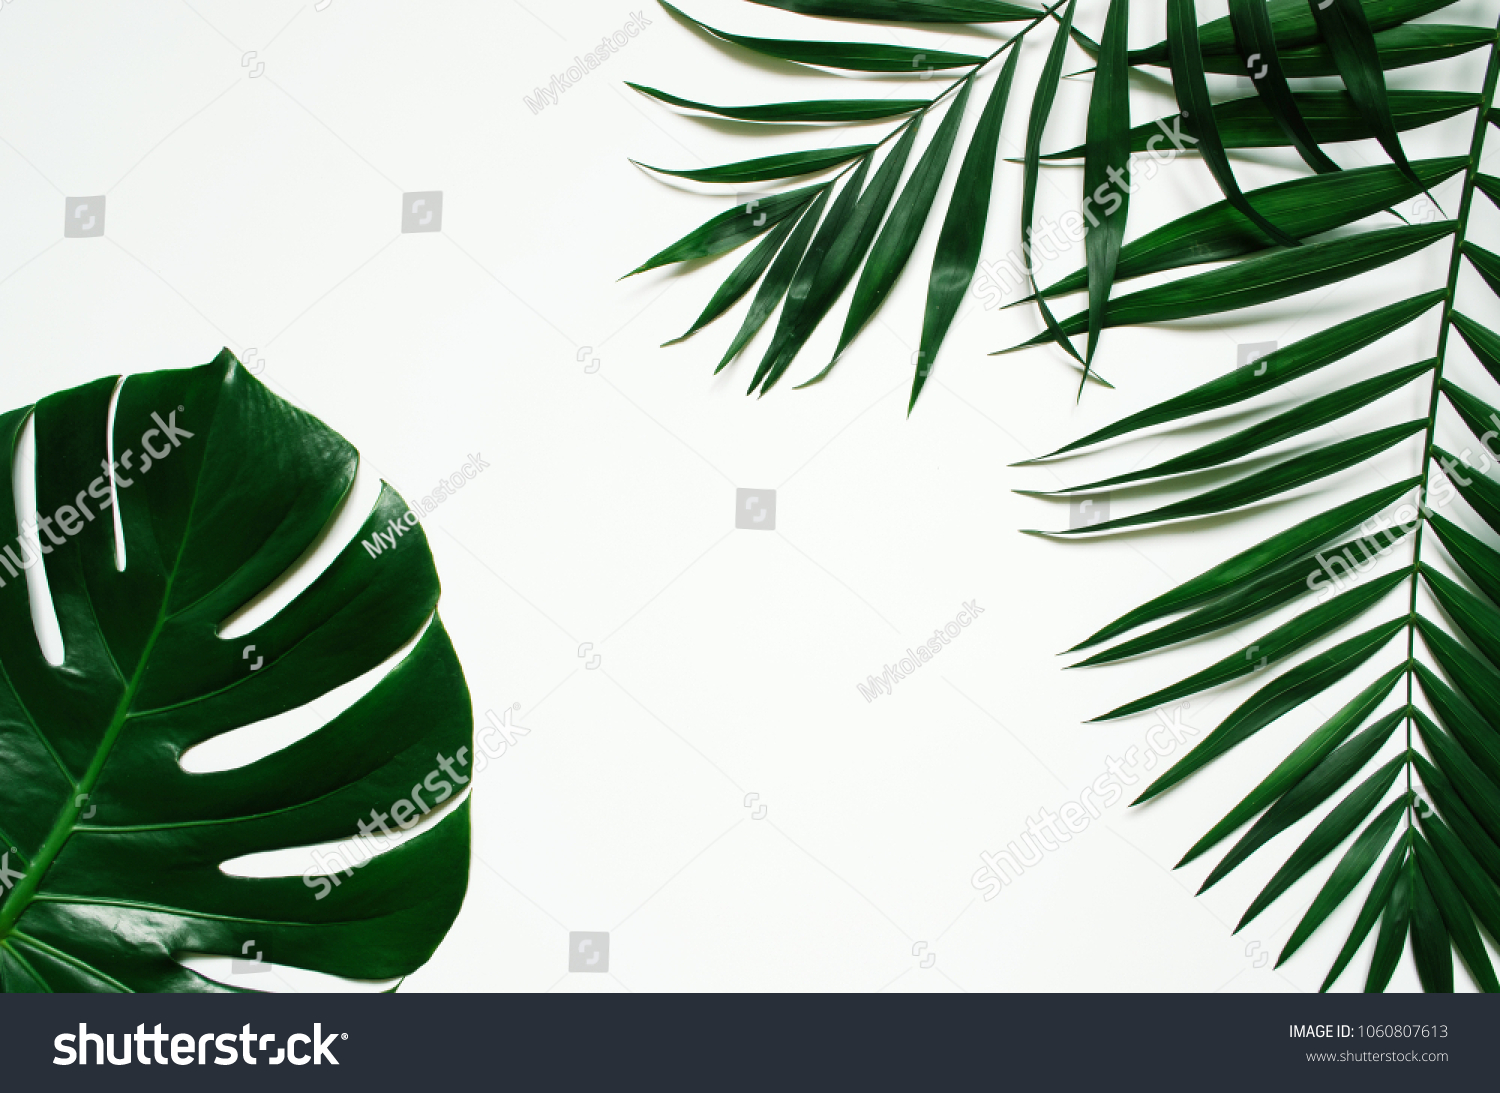 Green flat lay tropical palm leaf branches on white background. Room for text, copy, lettering. #1060807613